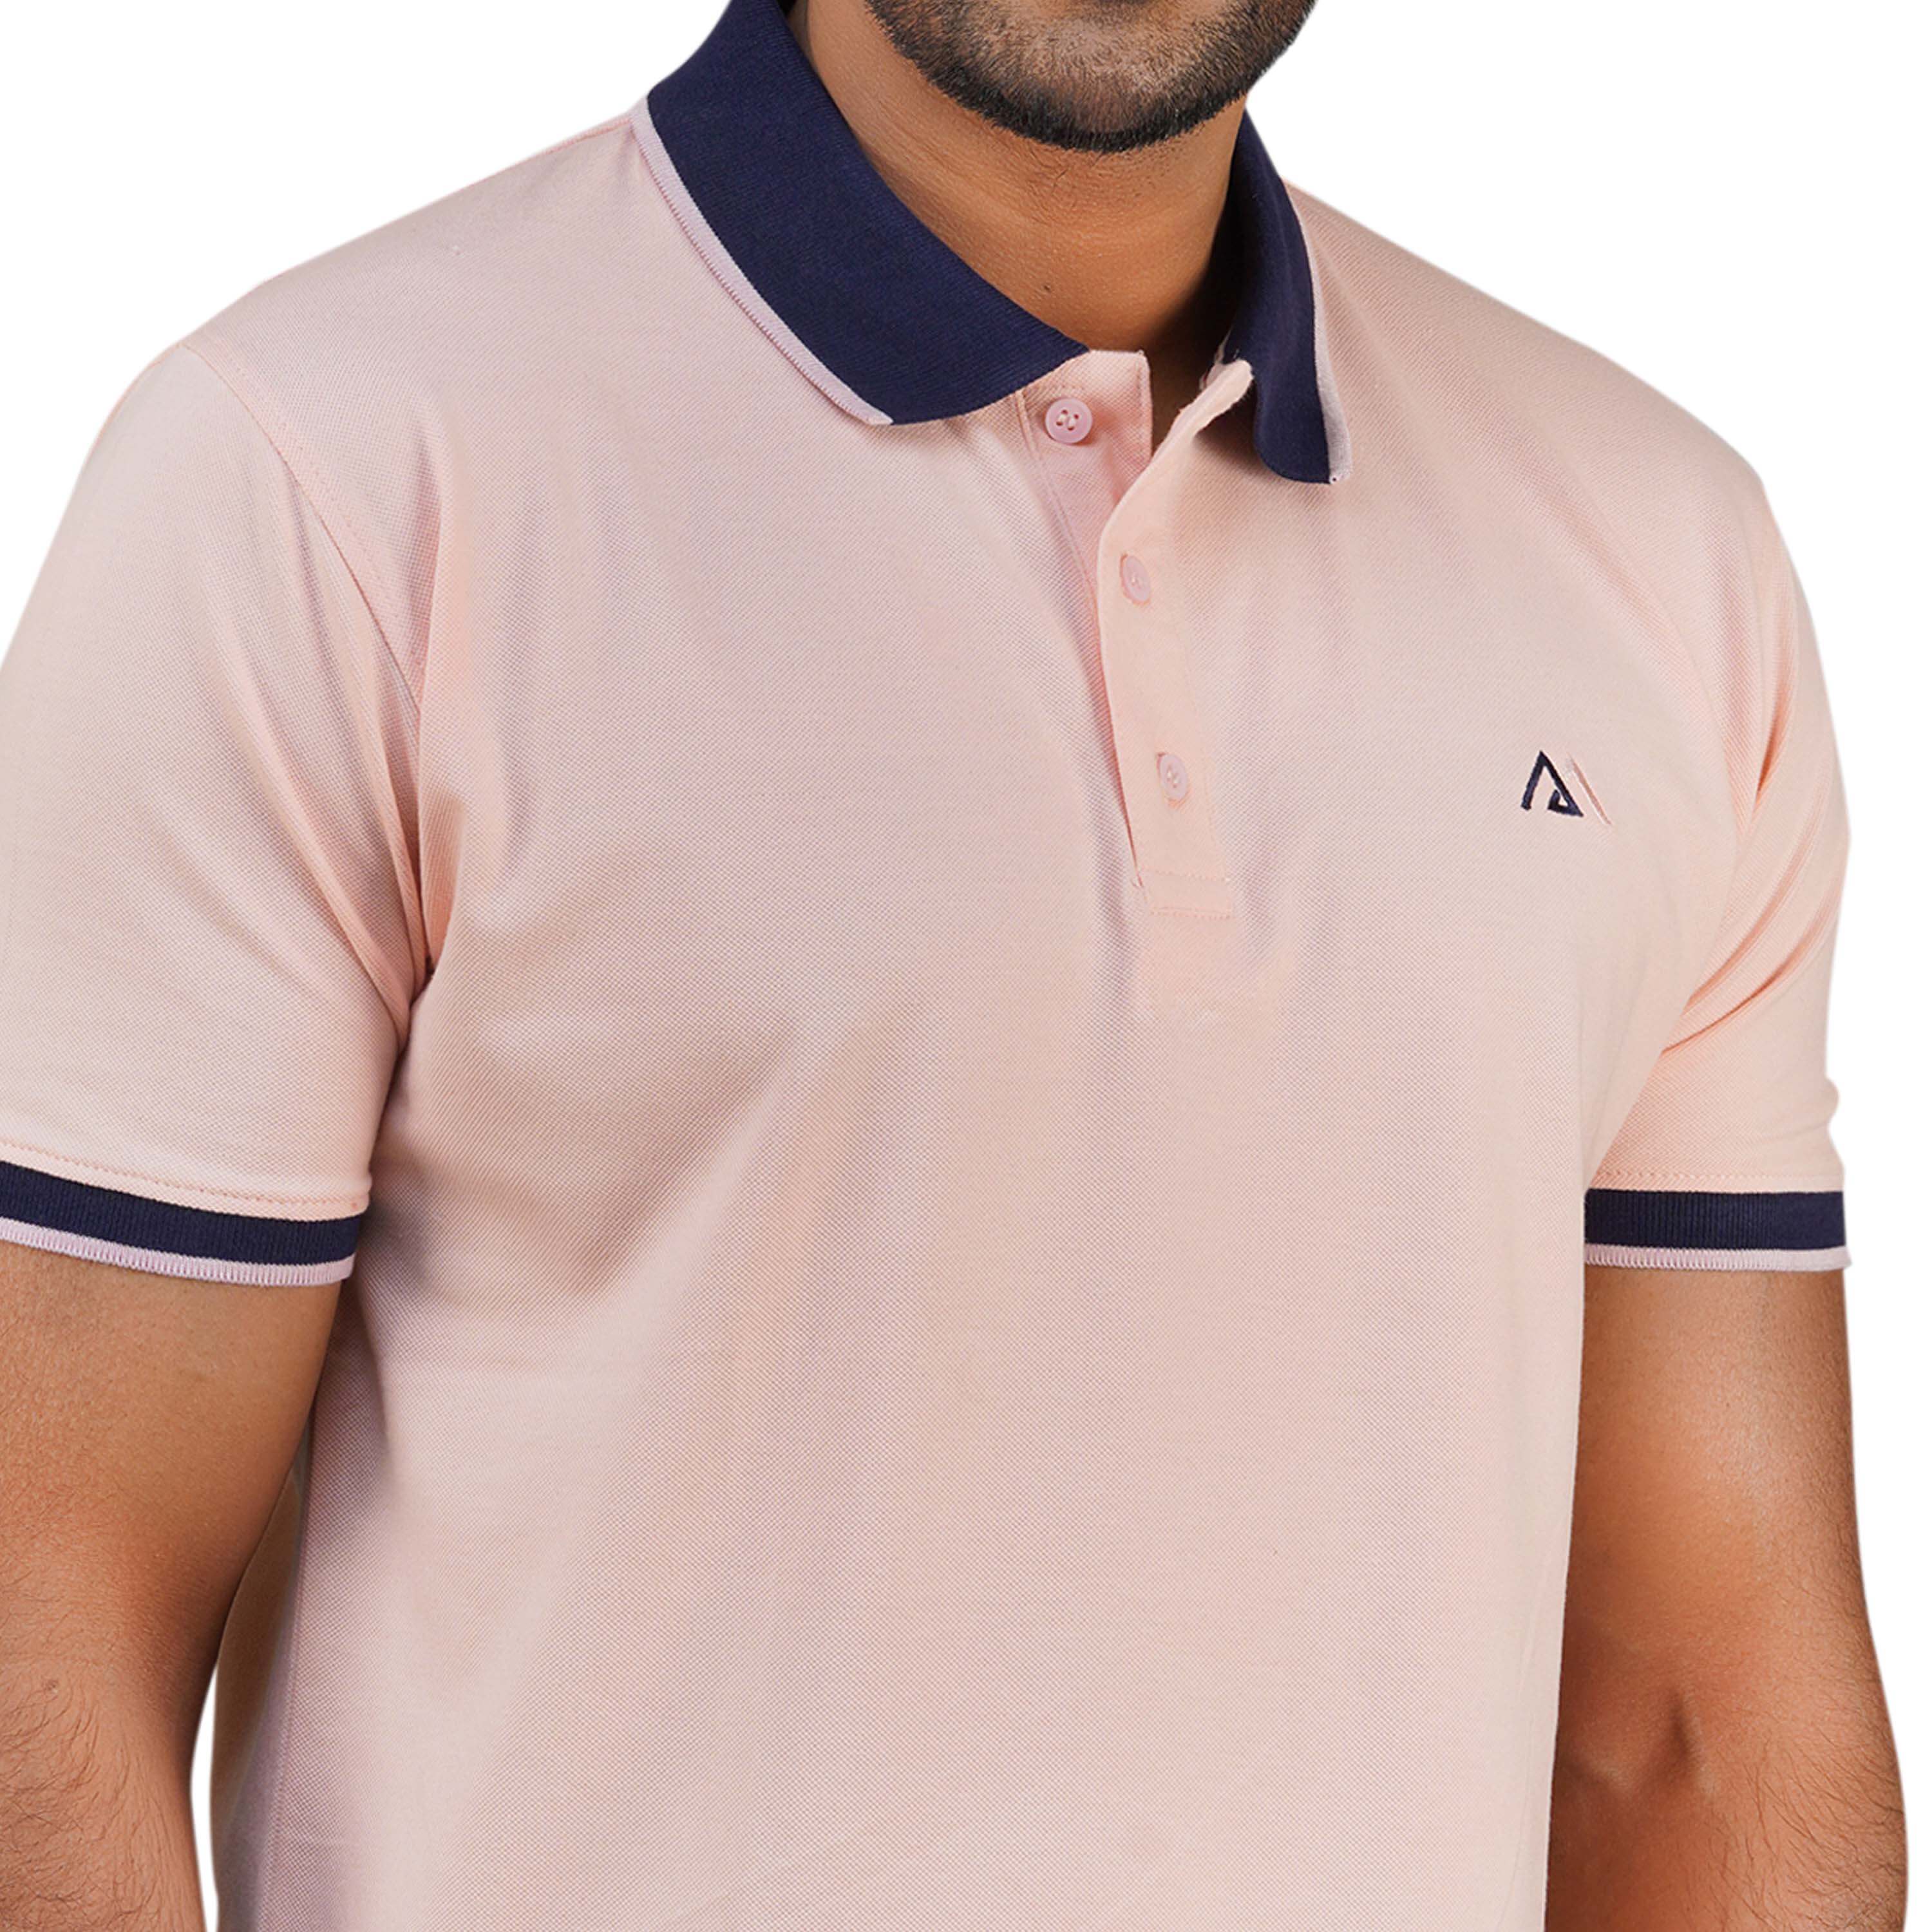 Polo Shirt for Men  Solid Light Pink Color